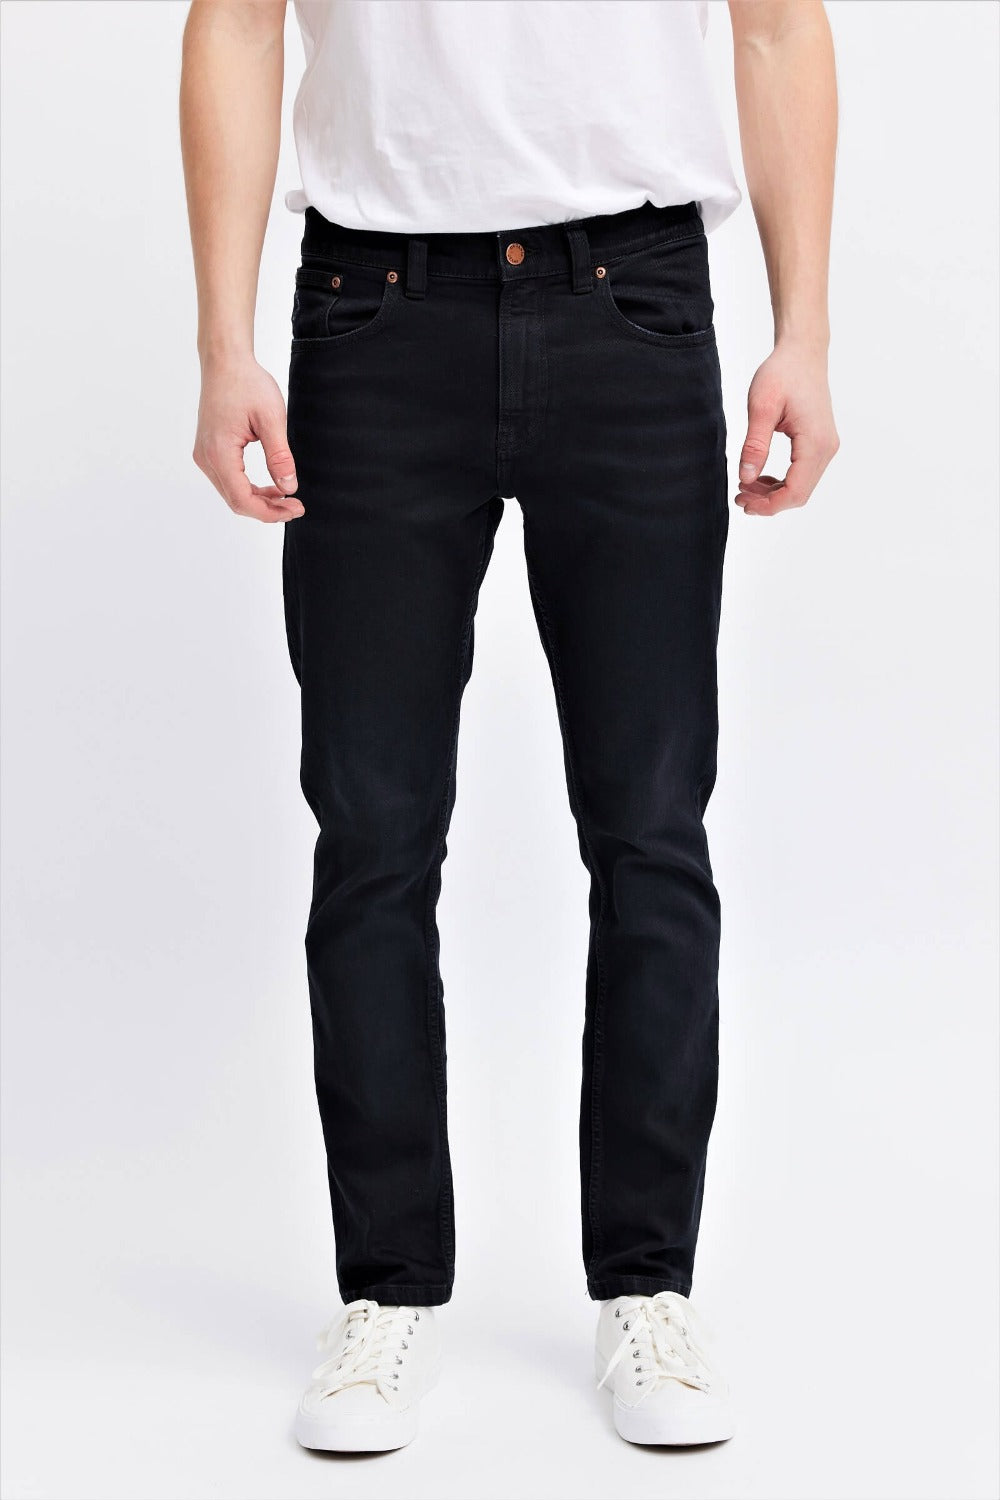 lease organic jeans for men